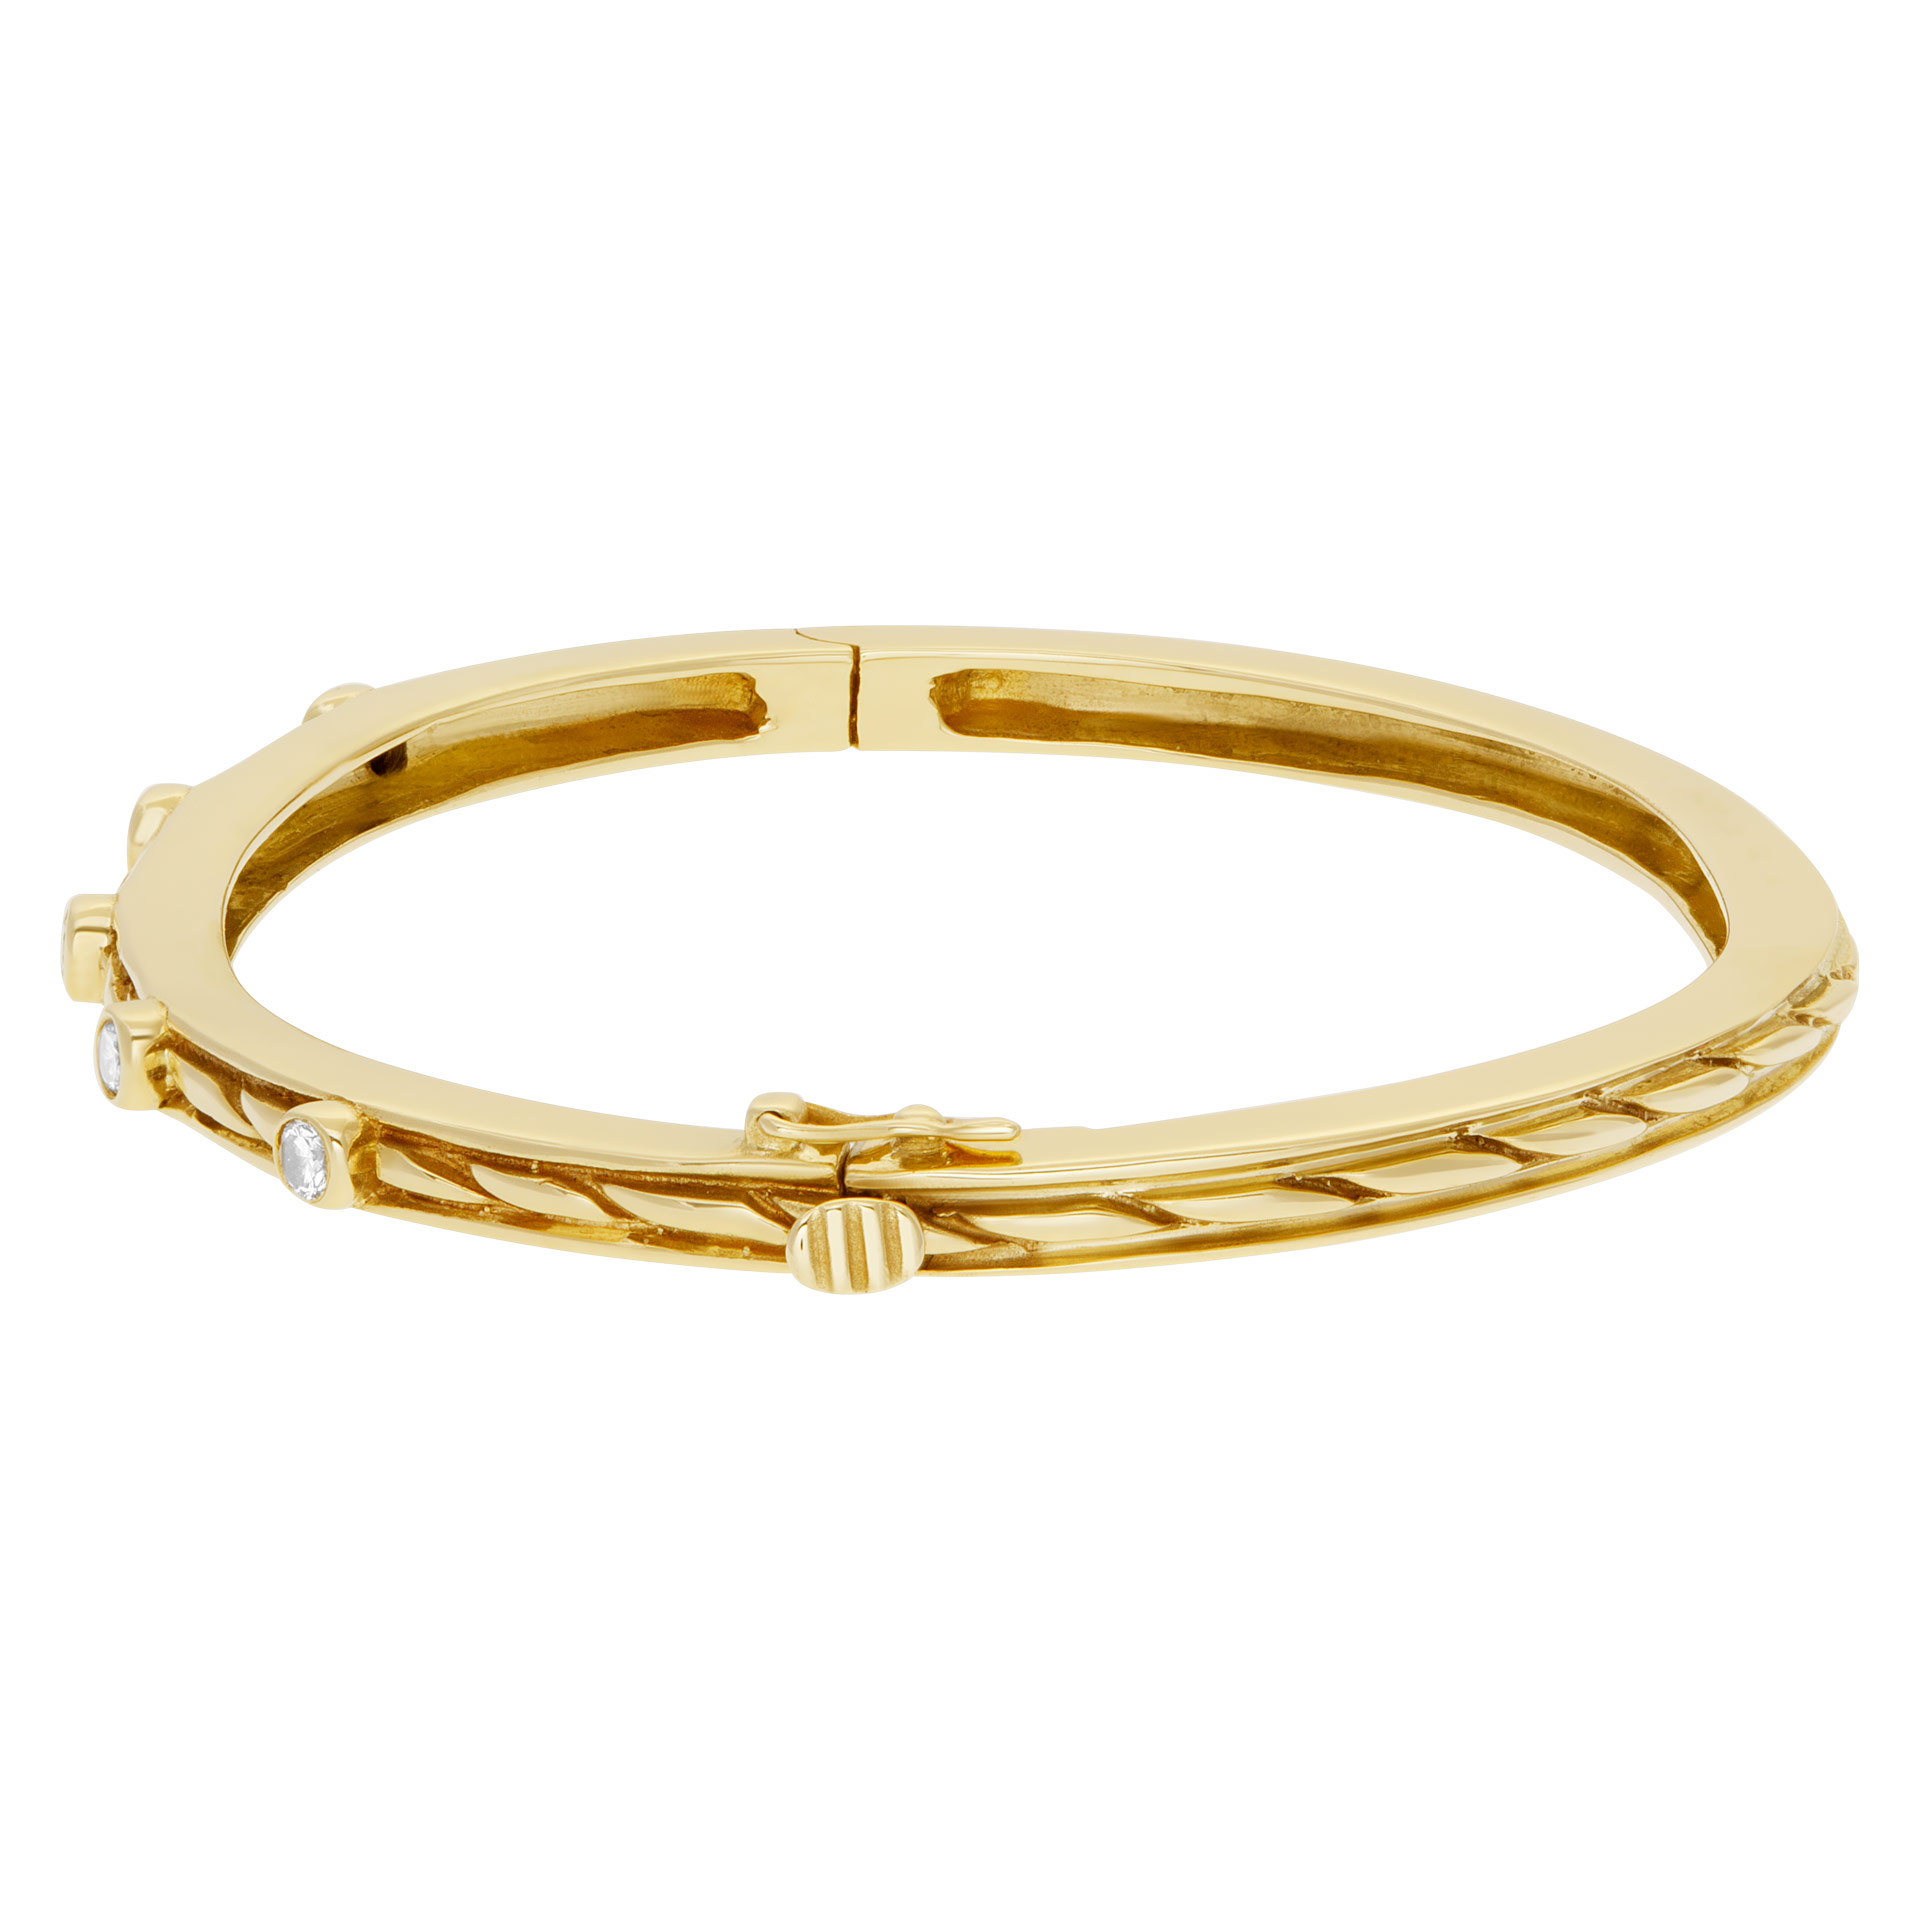 Bangle bracelet with 5 swirls in 14k yellow gold and diamonds image 4